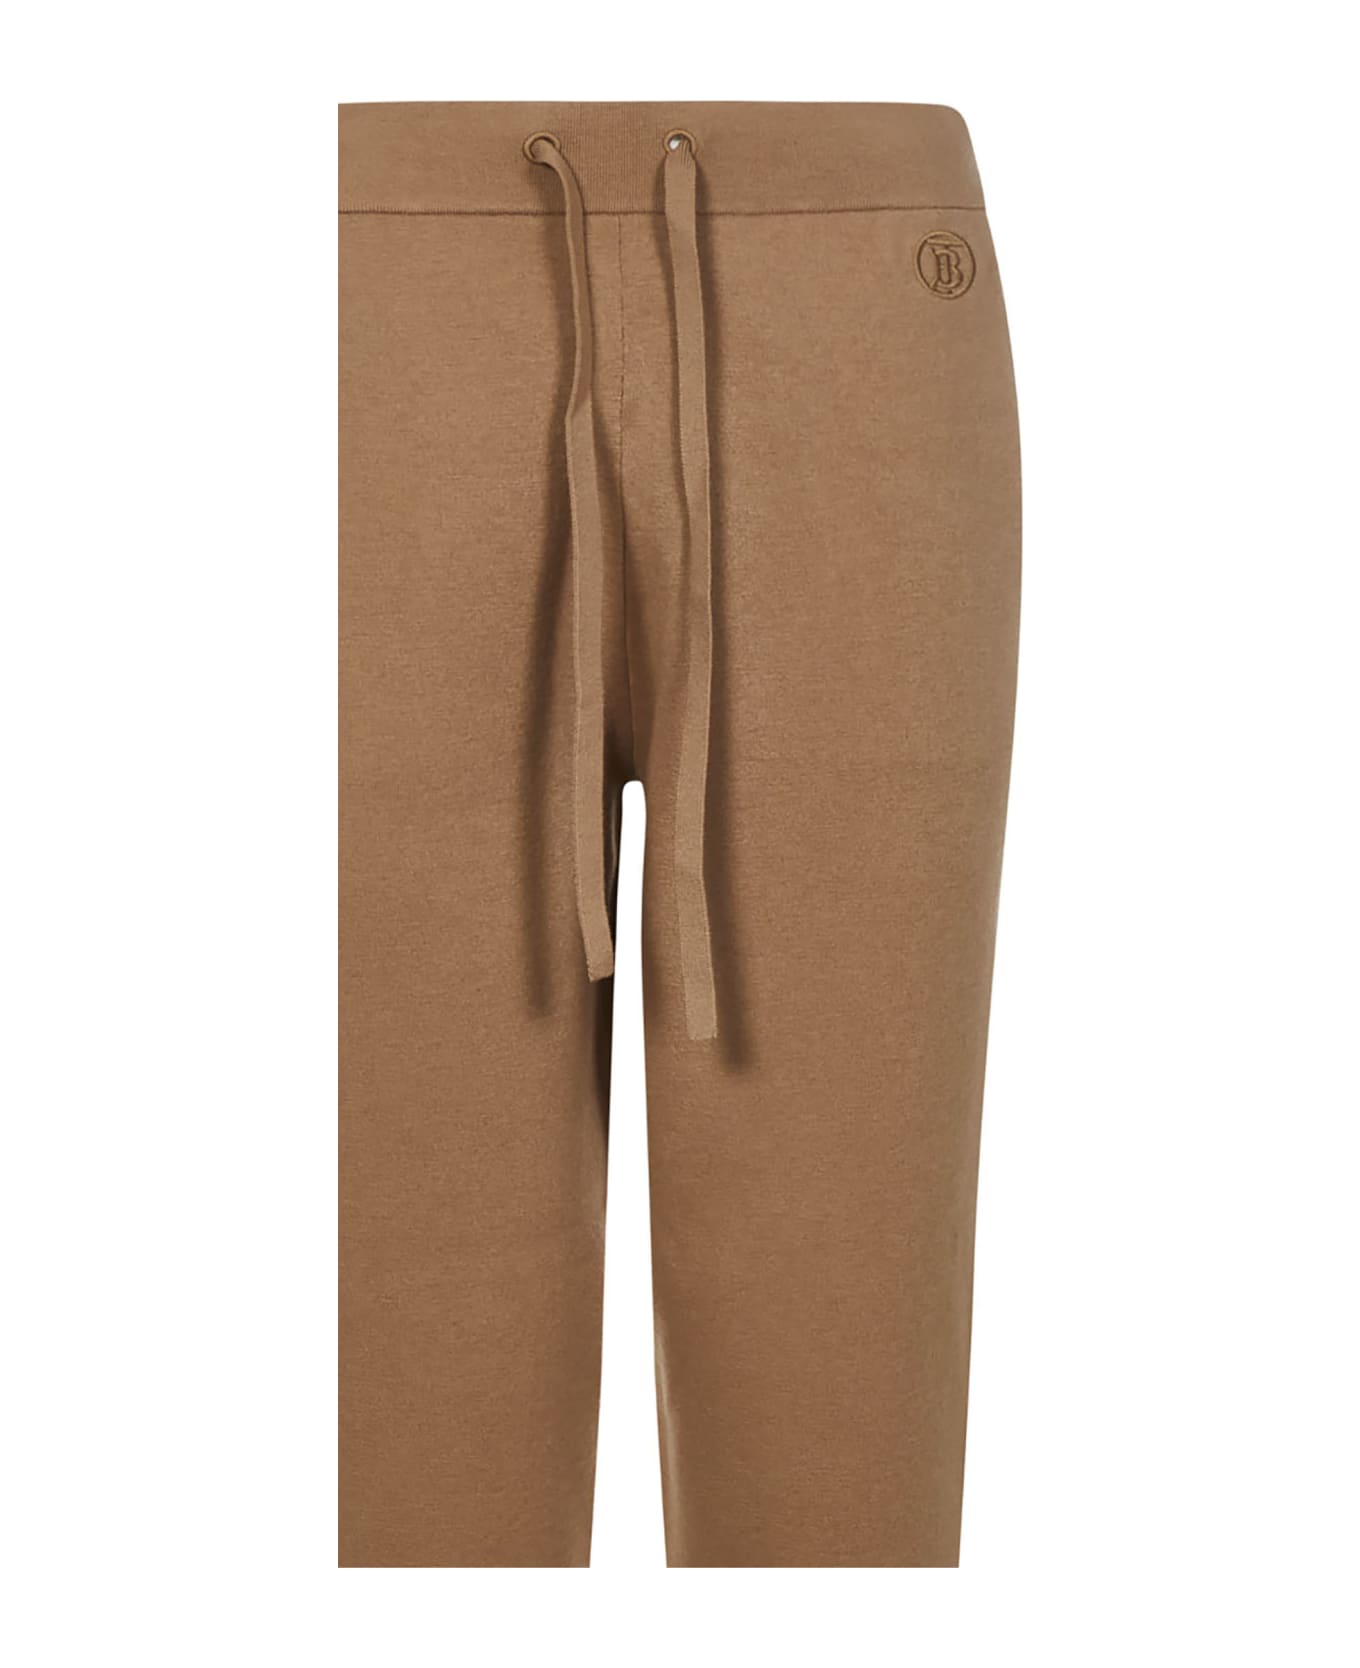 Burberry fit Trousers - Brown